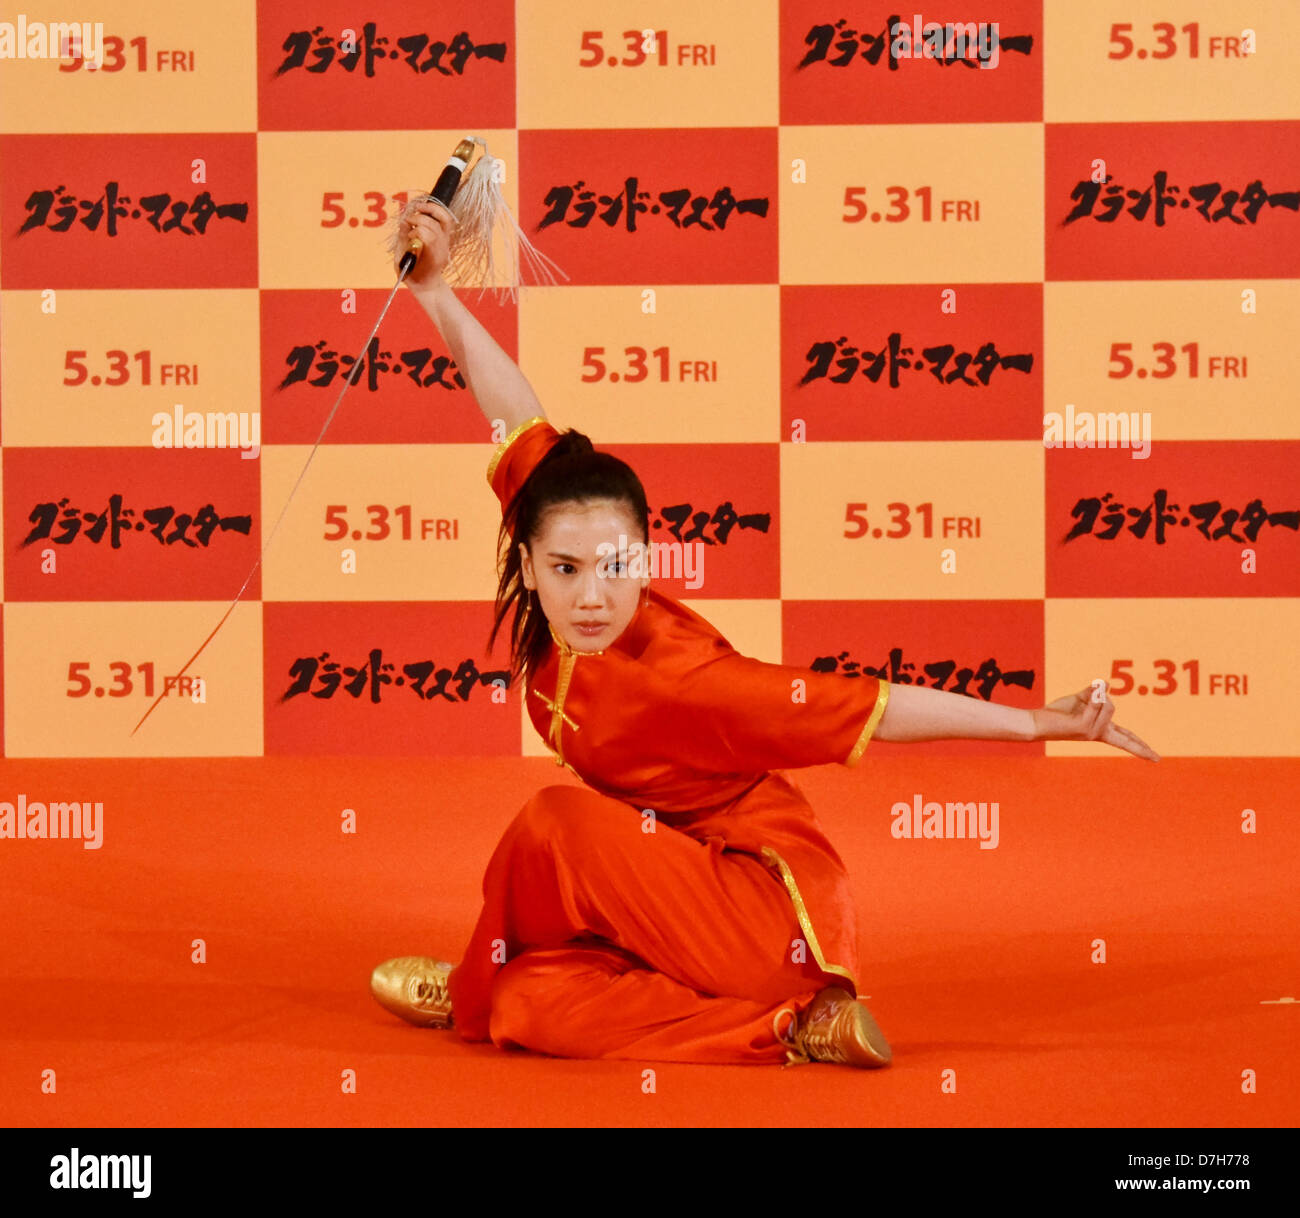 Tokyo, Japan. 7th May 2013. Chihiro Yamamoto. 4th World Youth Martial Arts Championship's medalist Chihiro Yamamoto performs Taijiquan form during the event for 'The Grandmaster' in Tokyo, Japan, on May 7, 2013. The film will open on May 31 in Japan. (Photo by AFLO/Alamy Live News) Stock Photo